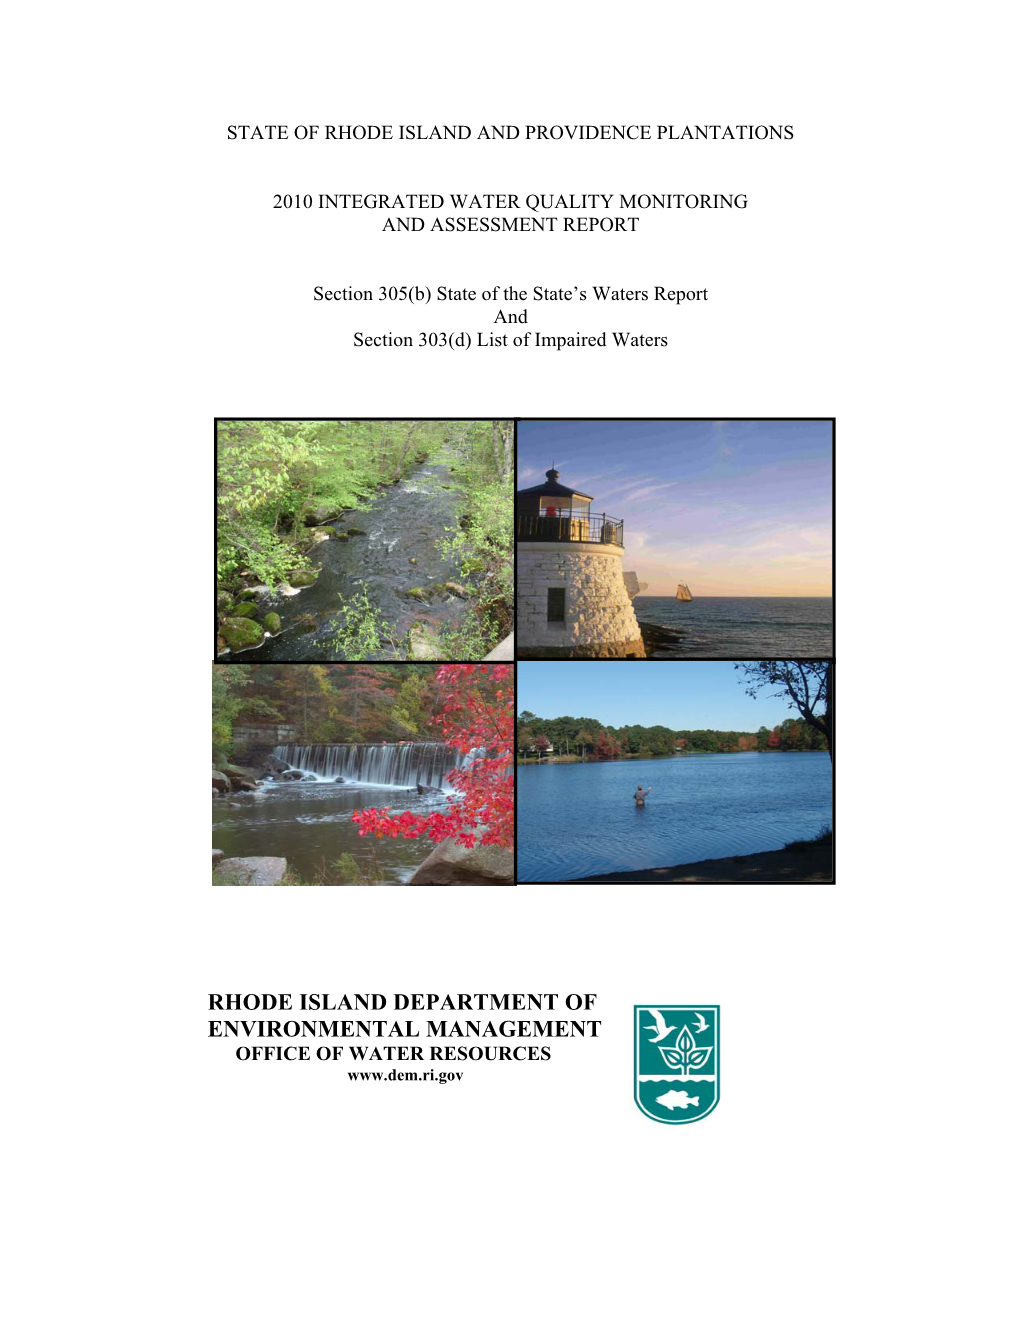 2010 Integrated Water Quality Monitoring and Assessment Report